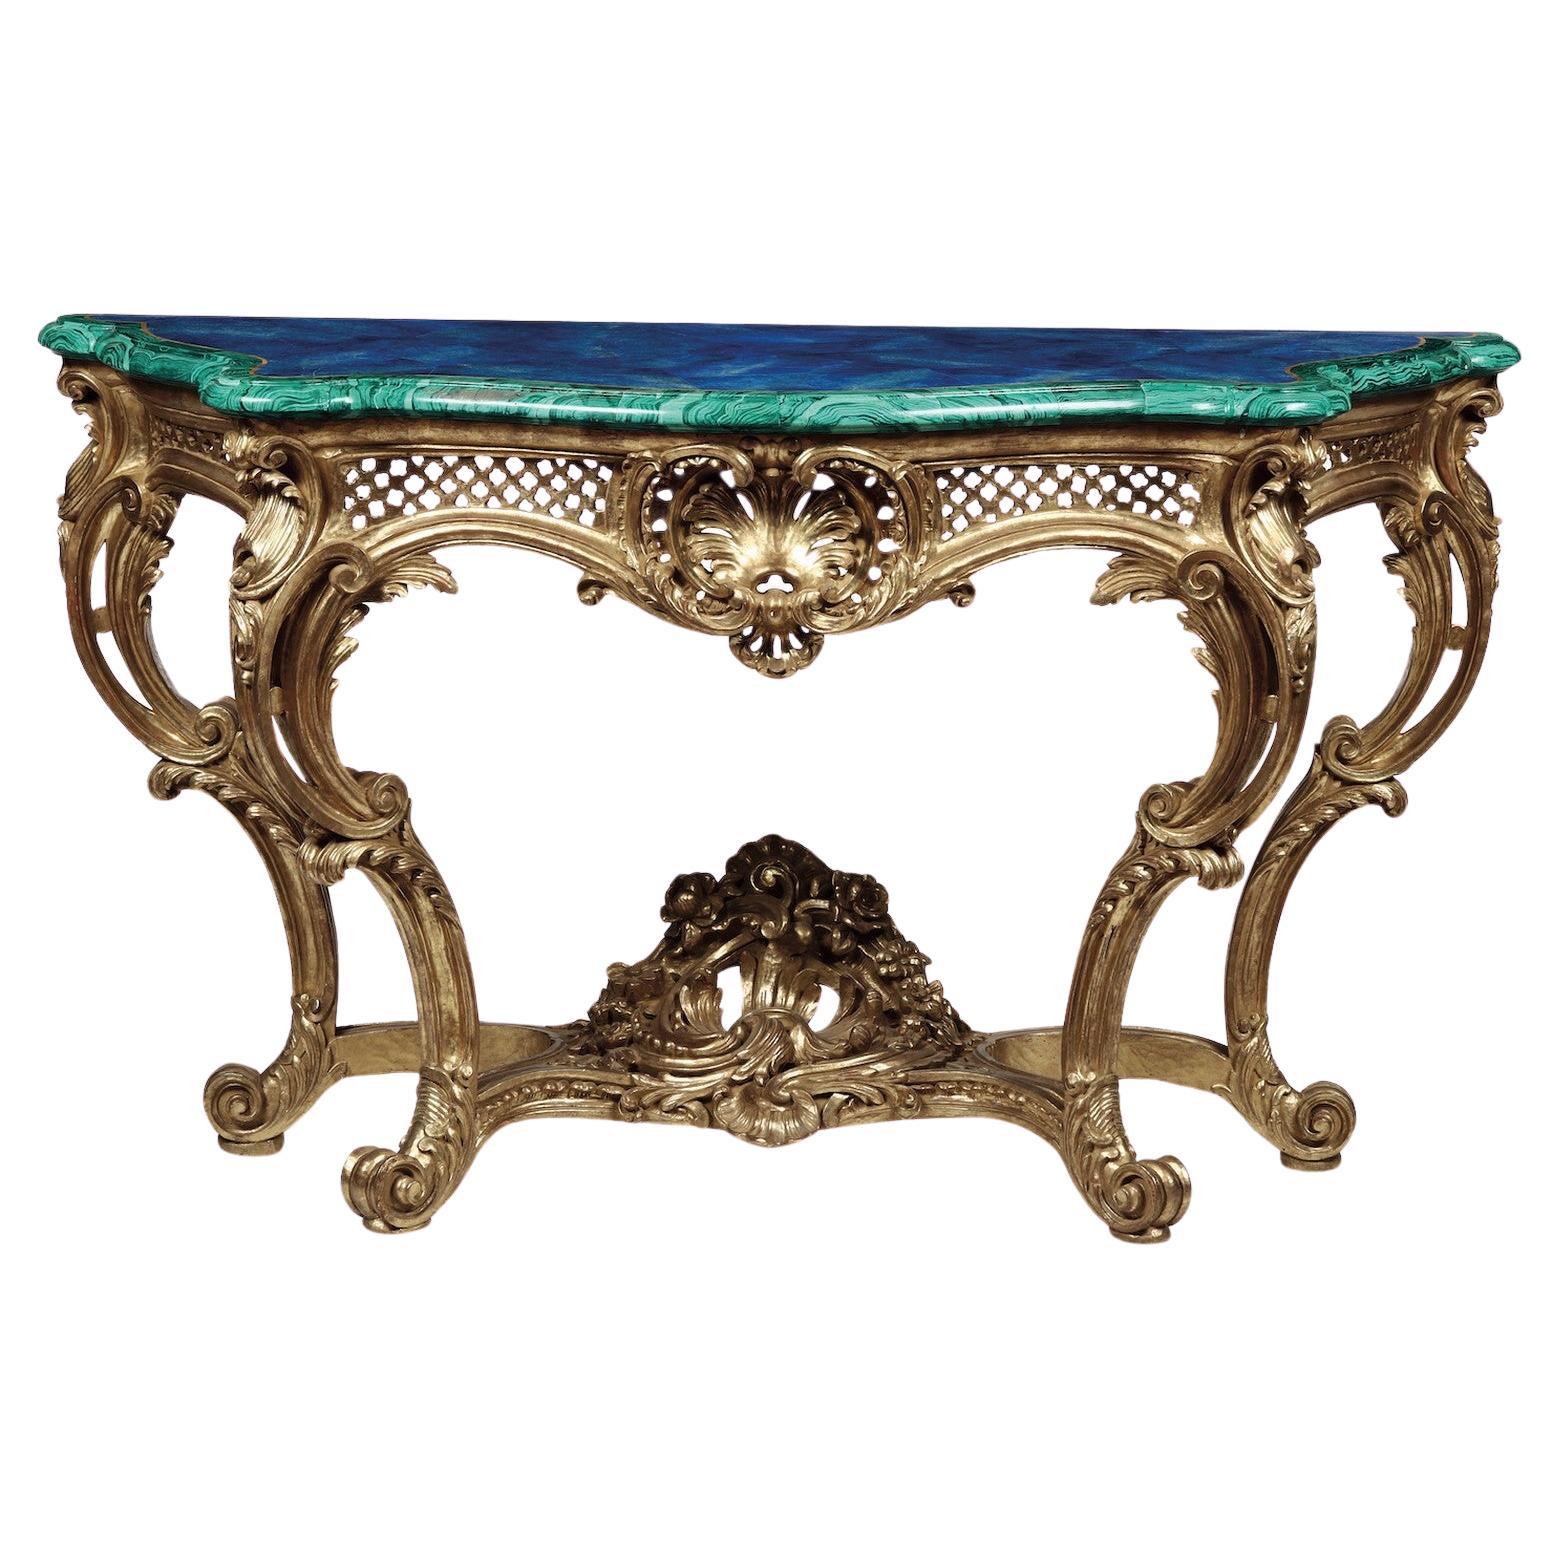 Valerian Rybar, Rocaille Console in Golden Wood, 20th Century